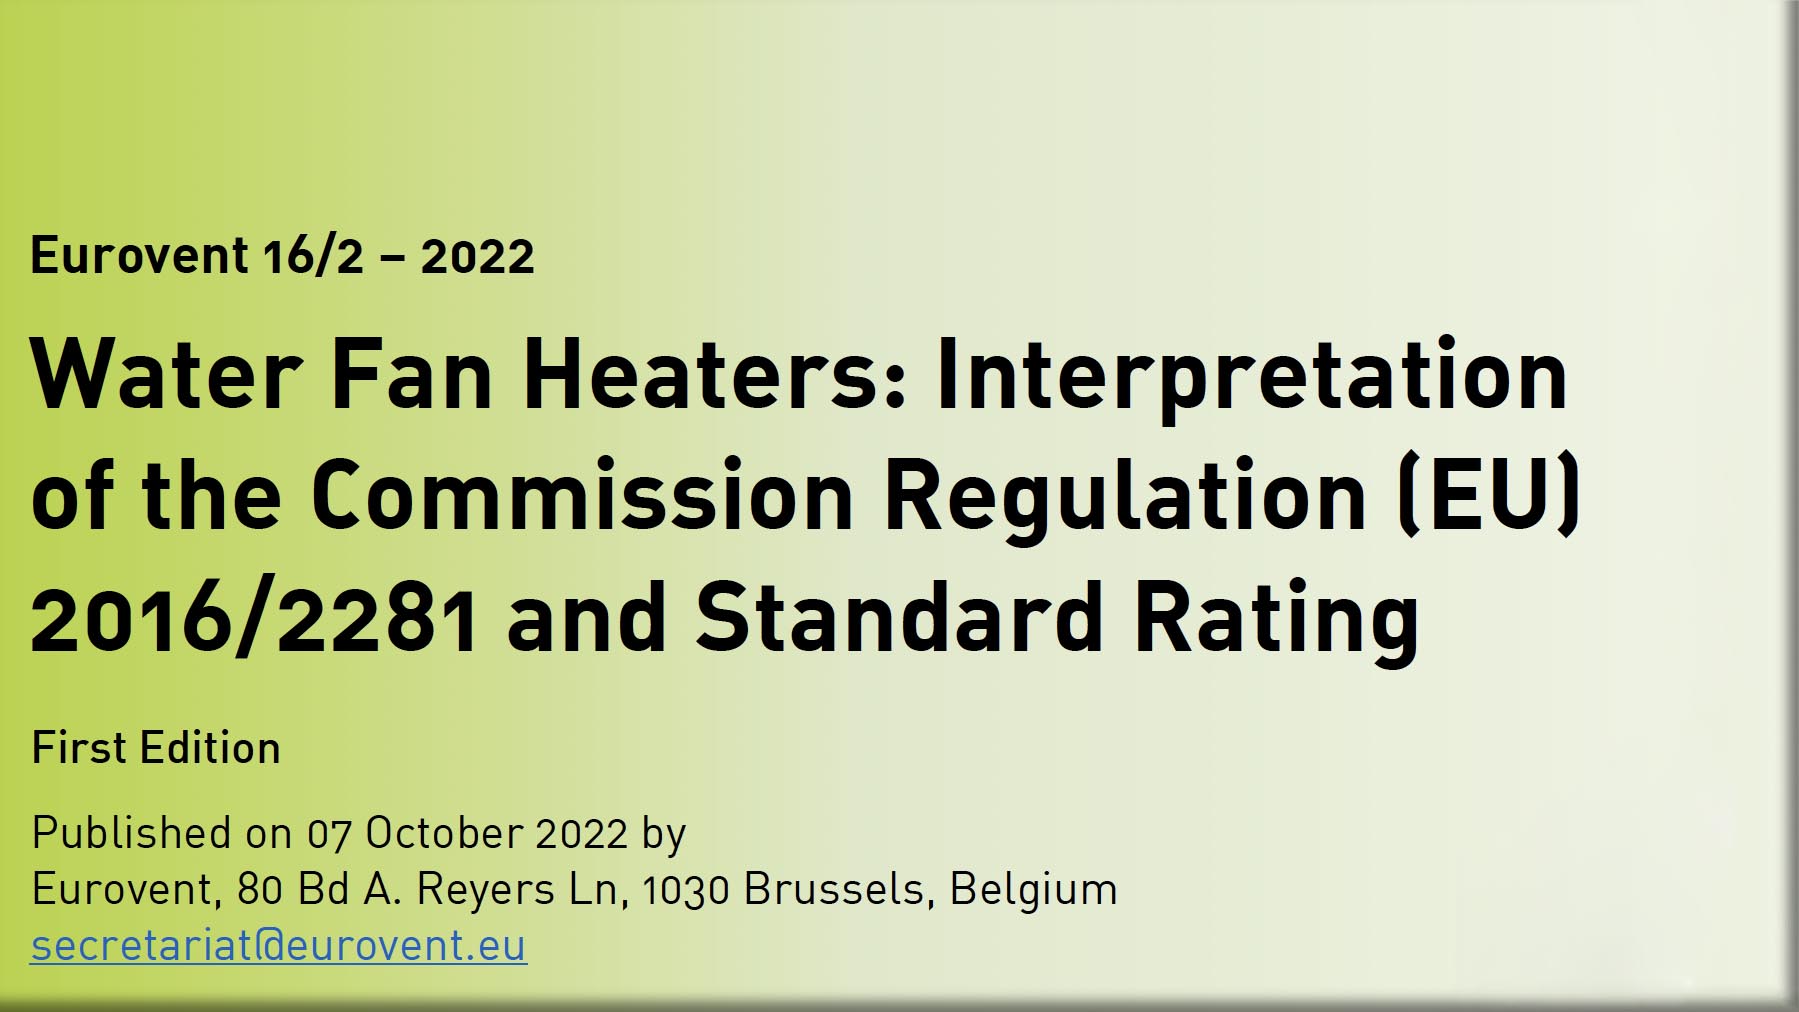 2022 - New Eurovent Recommendation on Water Fan Heaters